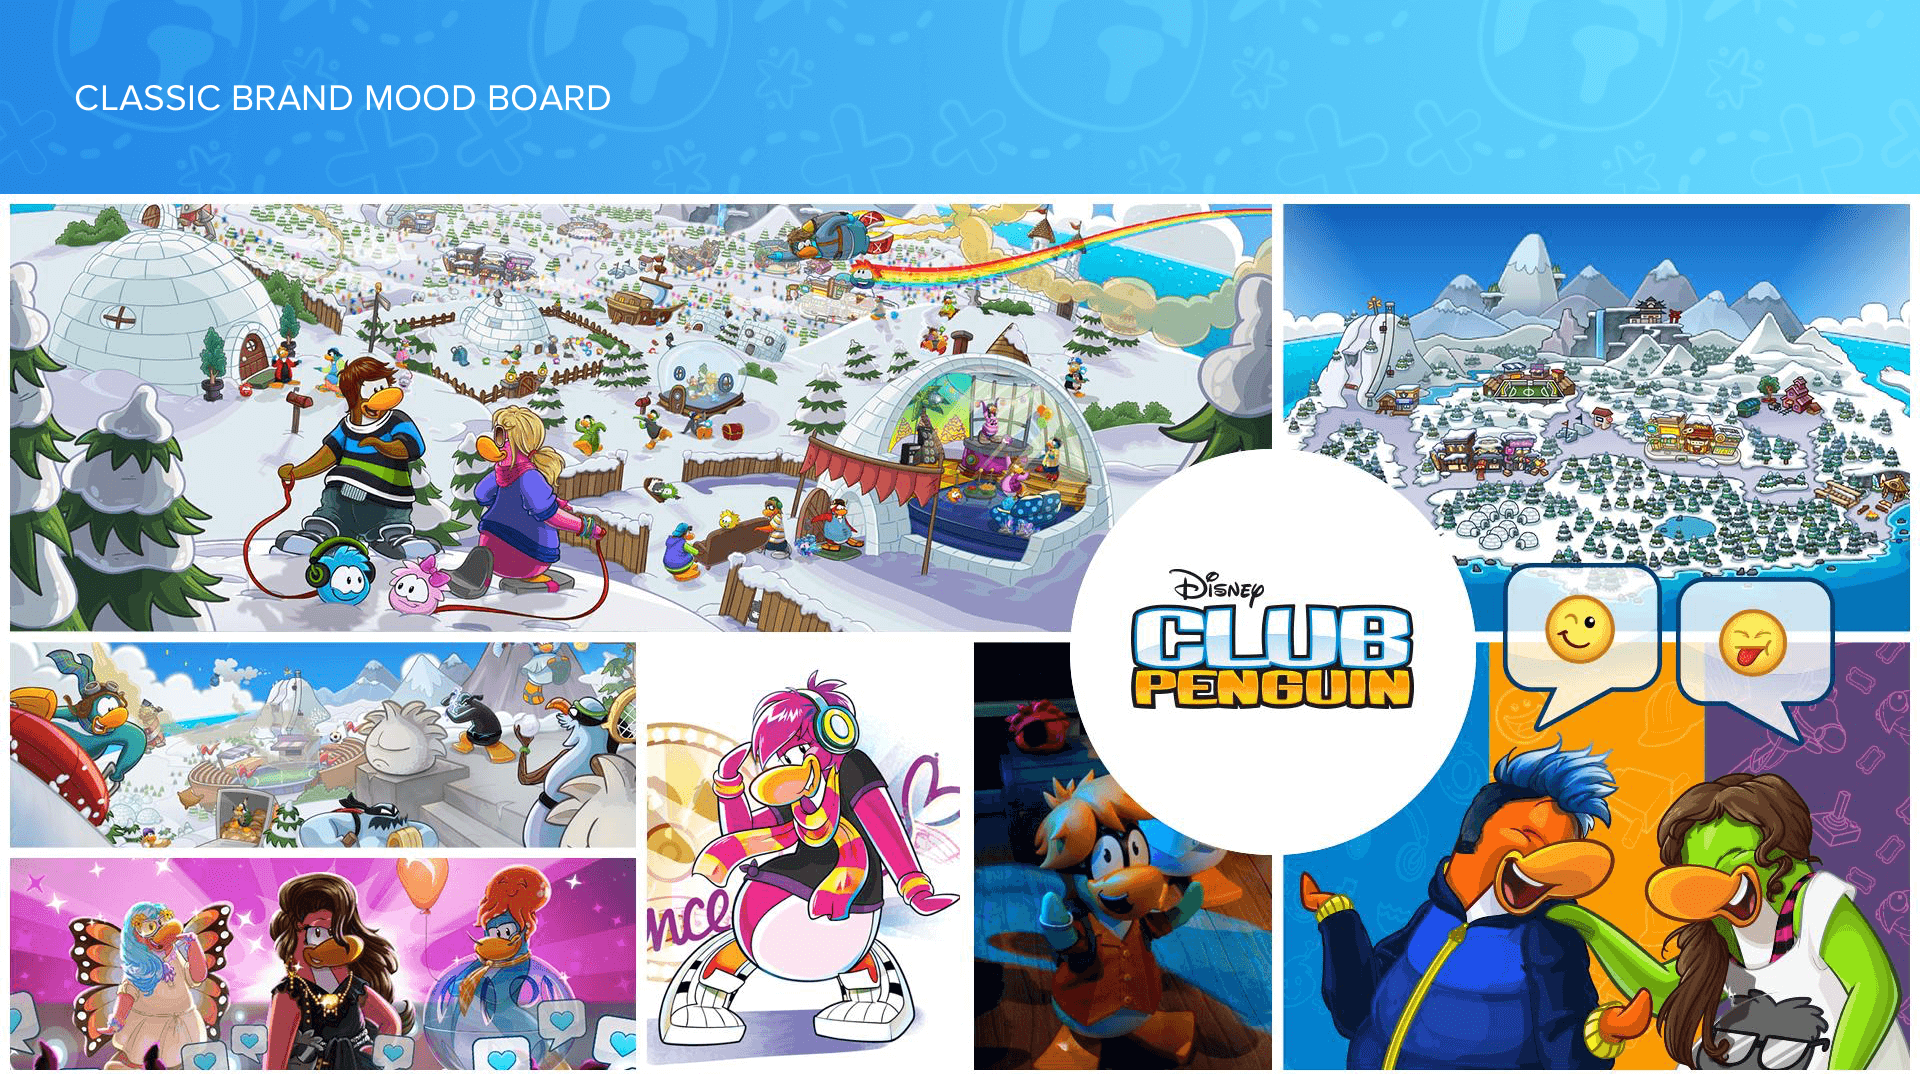 Club Penguin Island Launches New Fan-Requested Features –